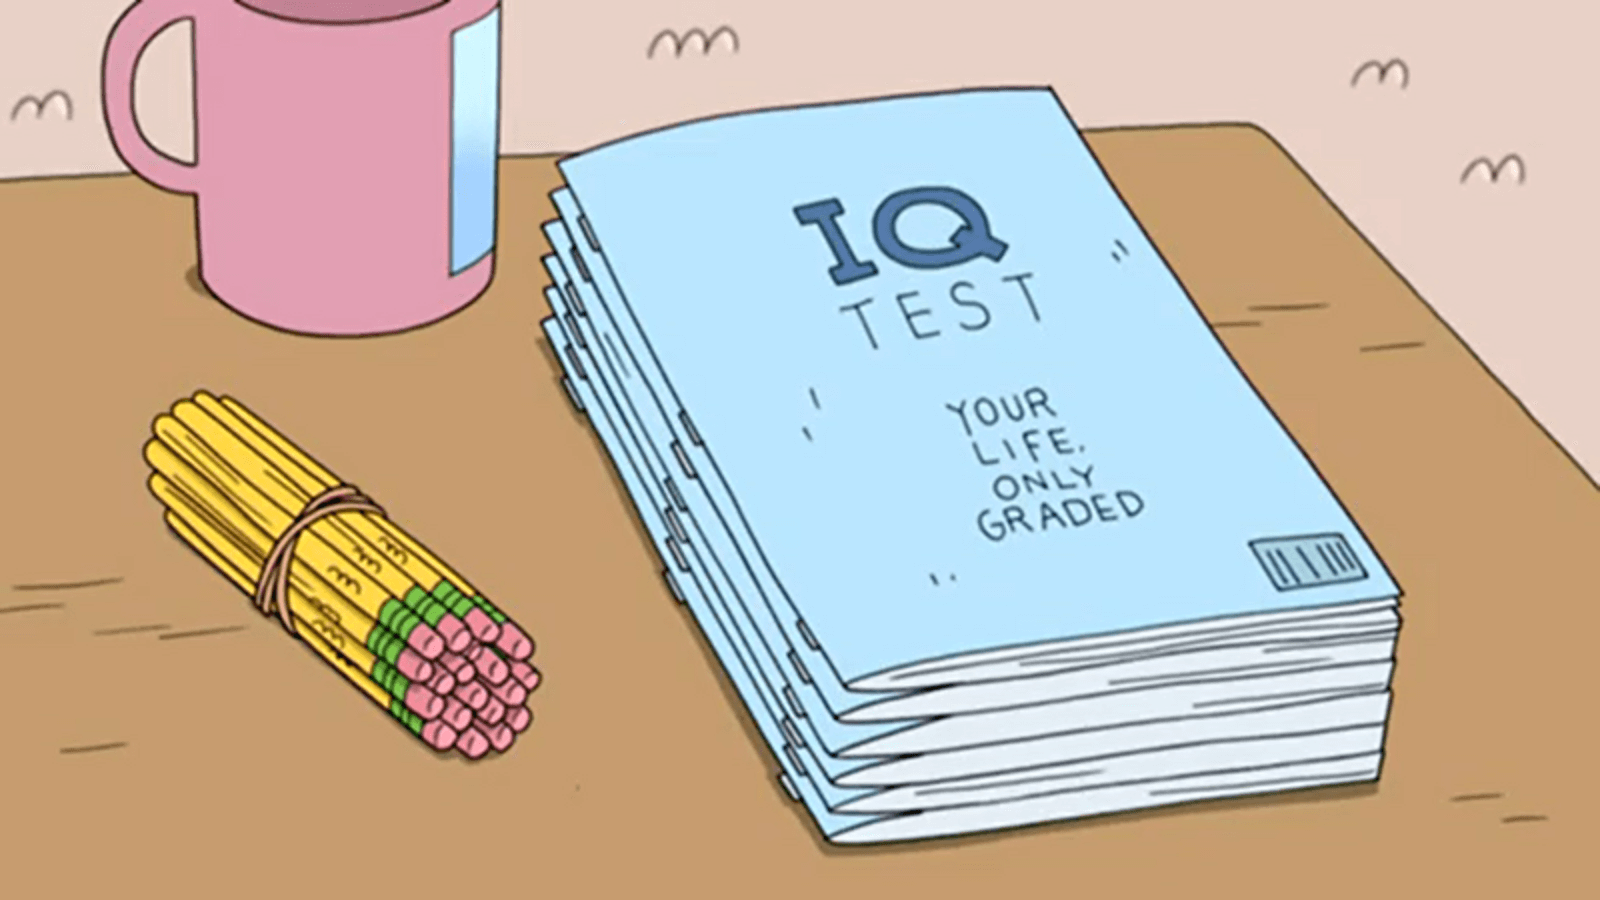 What is IQ test?